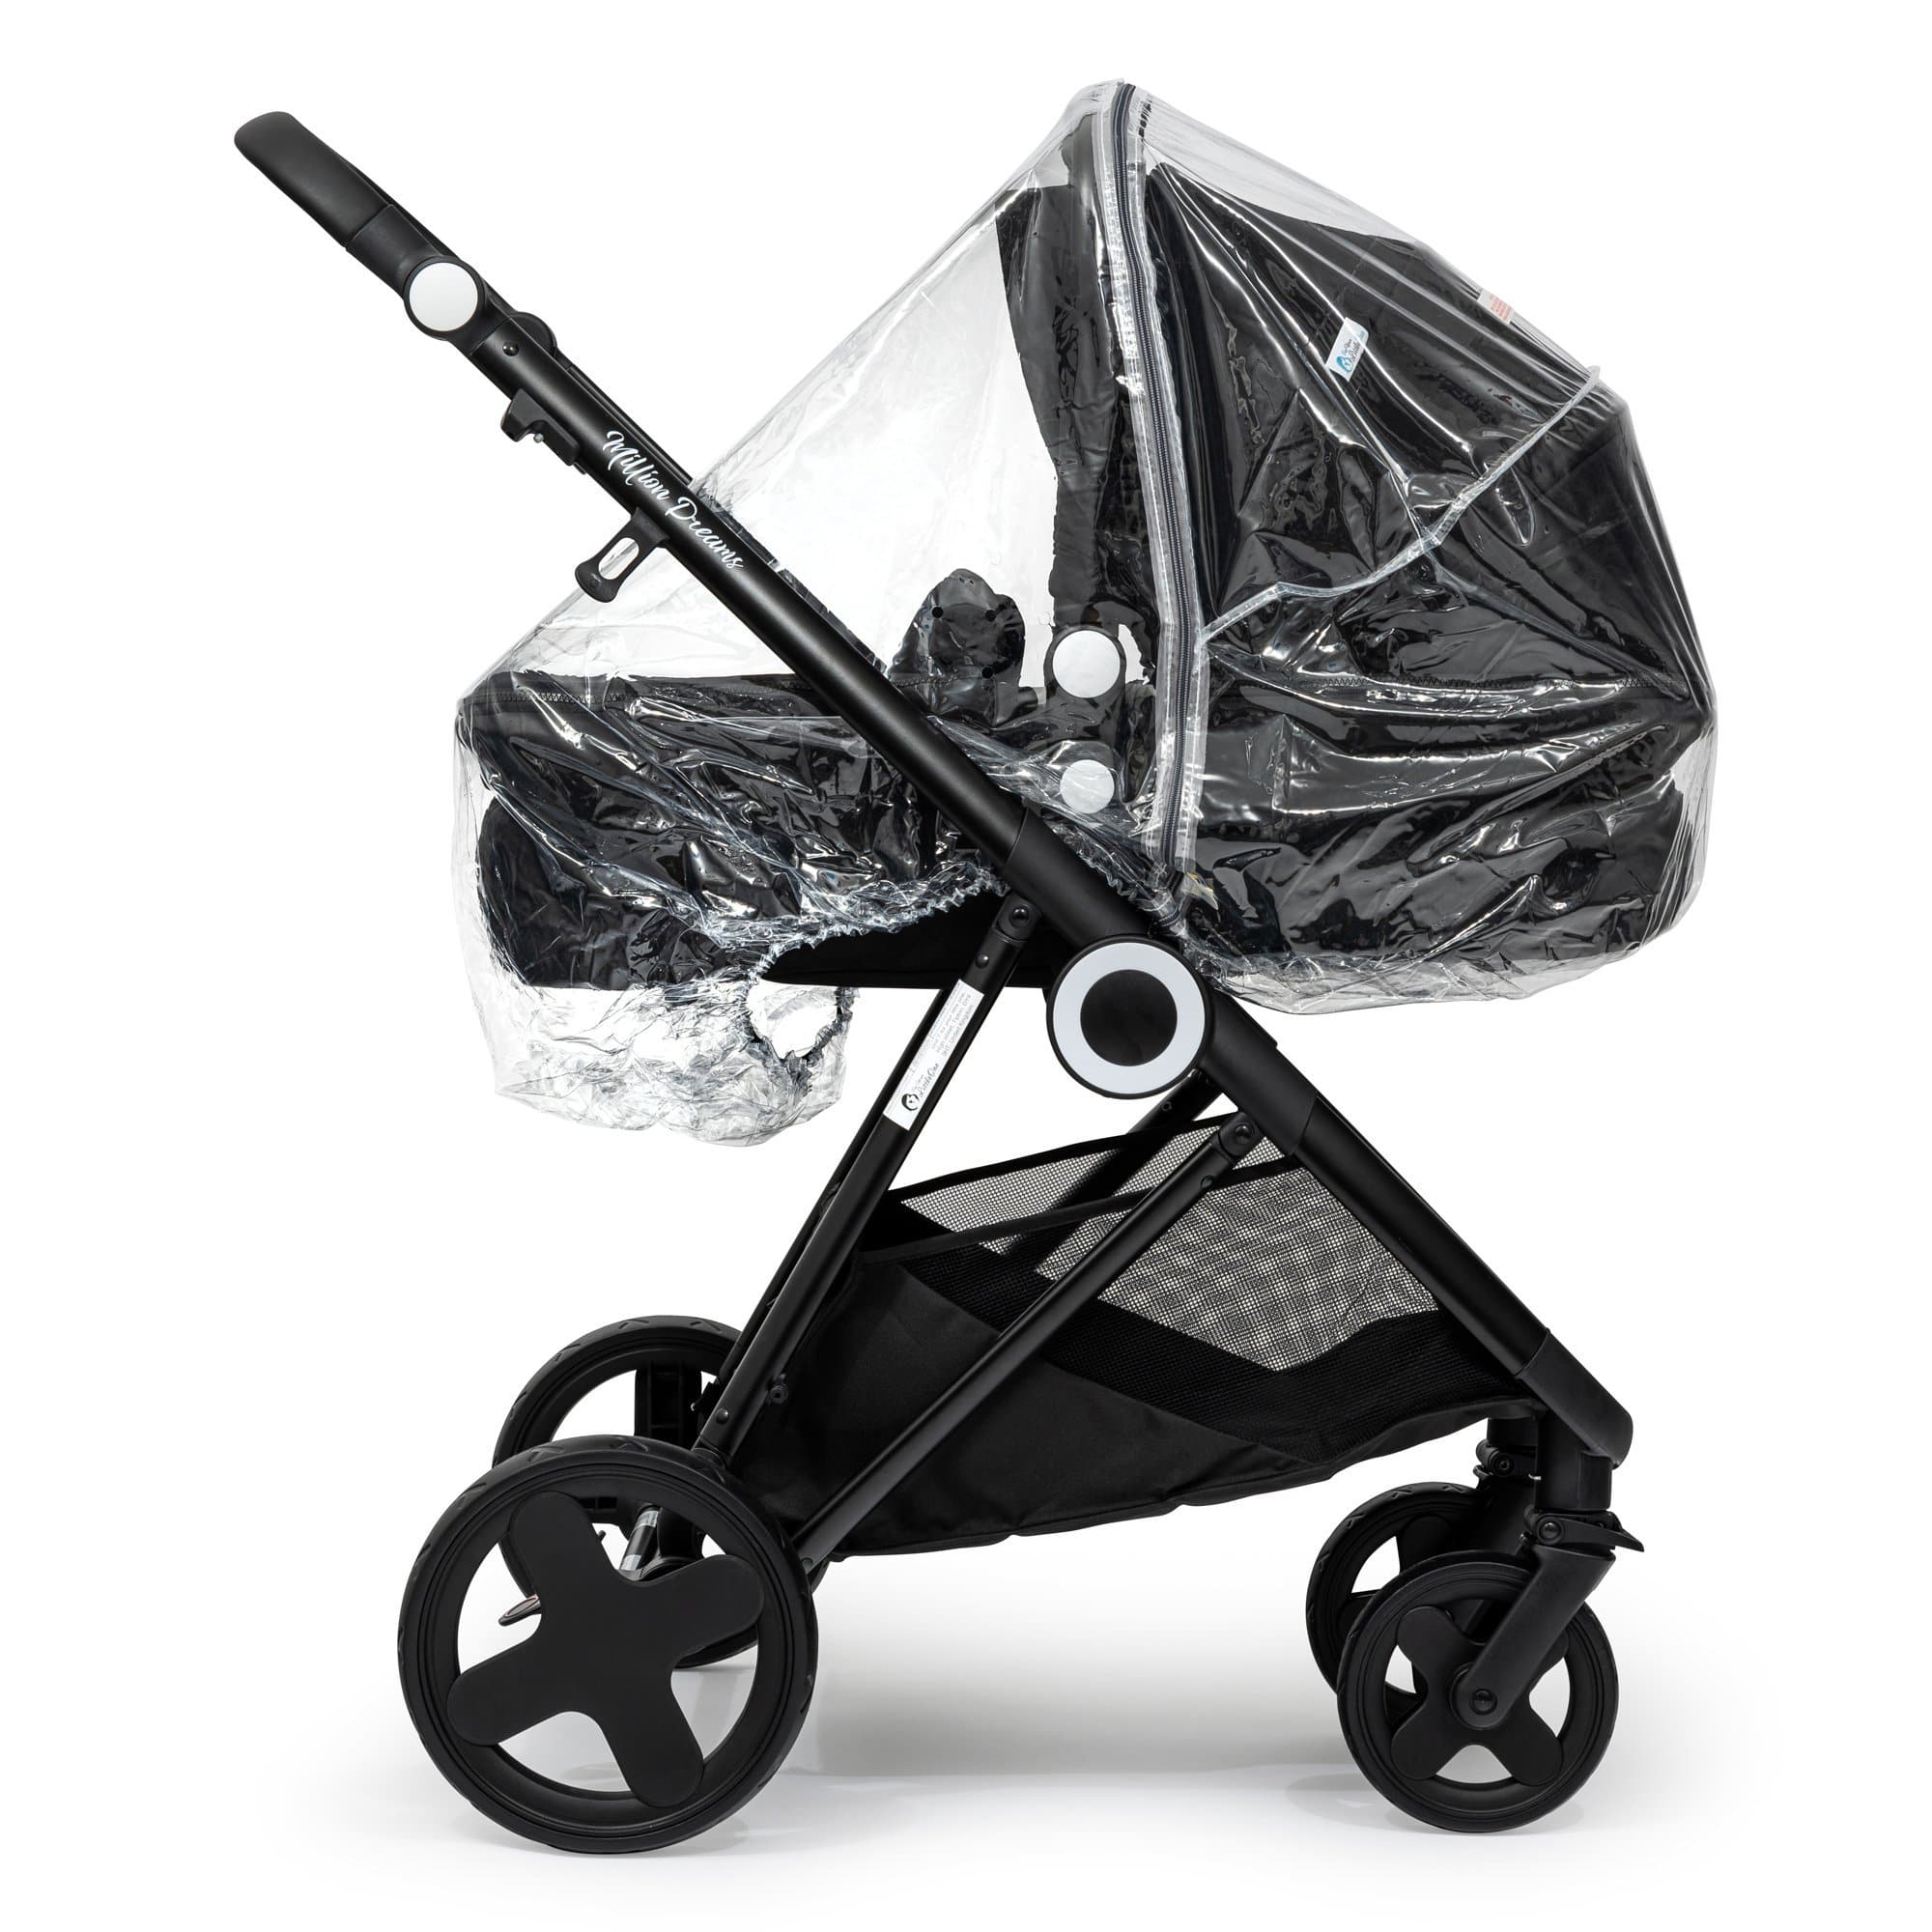 2 in 1 Rain Cover Compatible with Teutonia - Fits All Models - For Your Little One